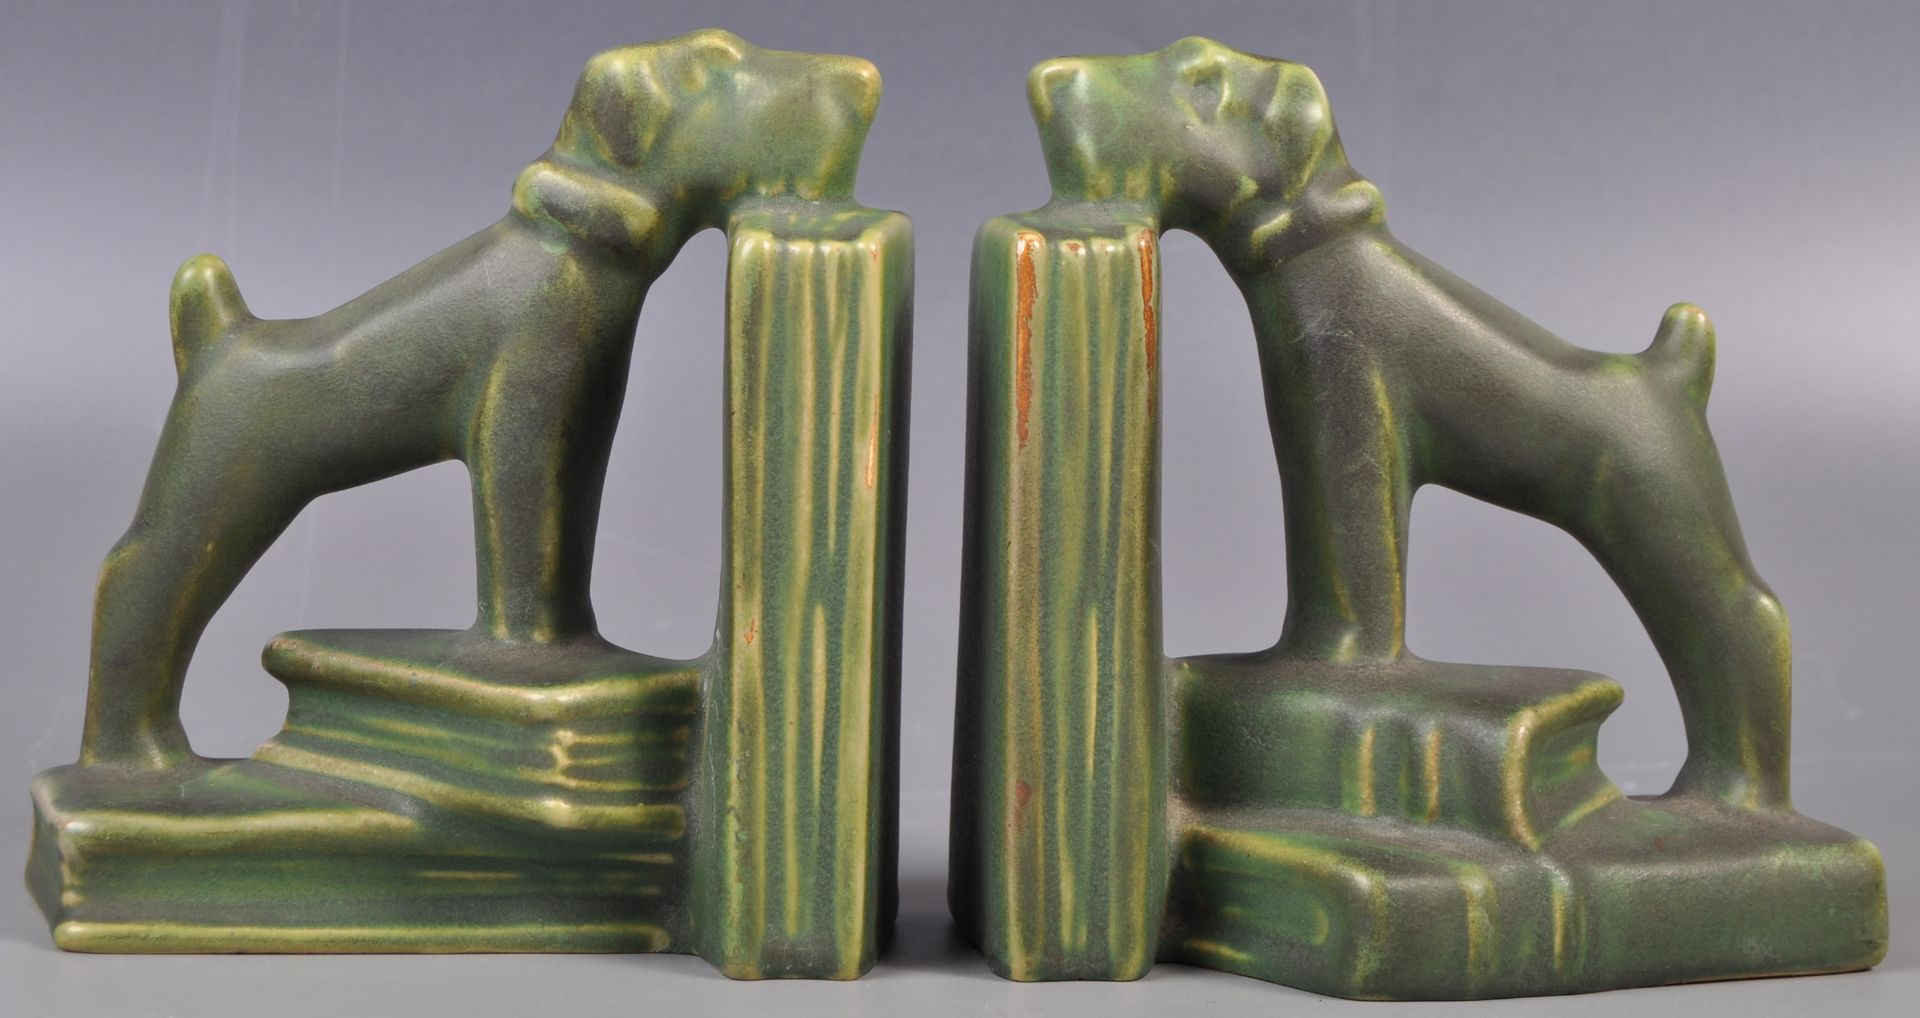 PAIR OF EARLY 20TH CENTURY ART DECO CERAMIC DOG BOOKENDS